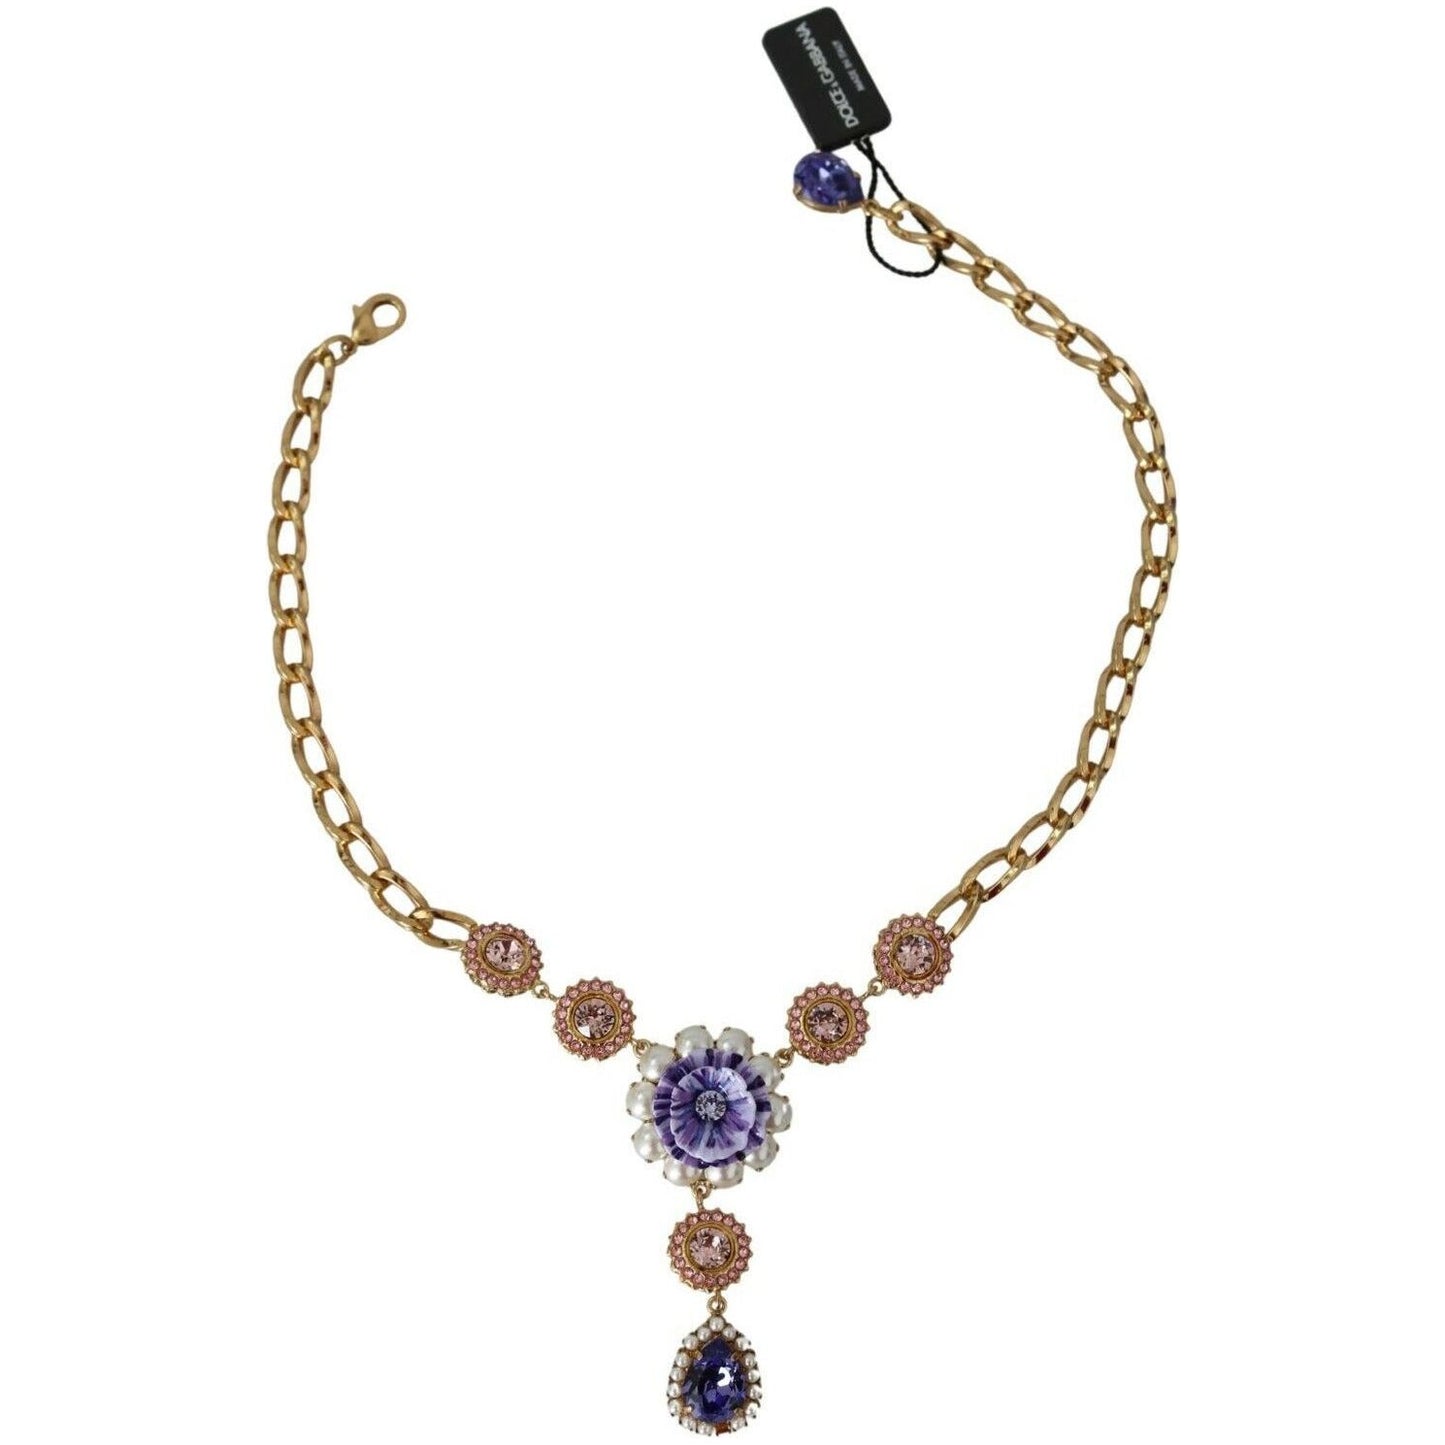 Dolce & Gabbana Elegant Gold Crystal Floral Charm Necklace WOMAN NECKLACE pink-gold-brass-crystal-purple-pearl-pendants